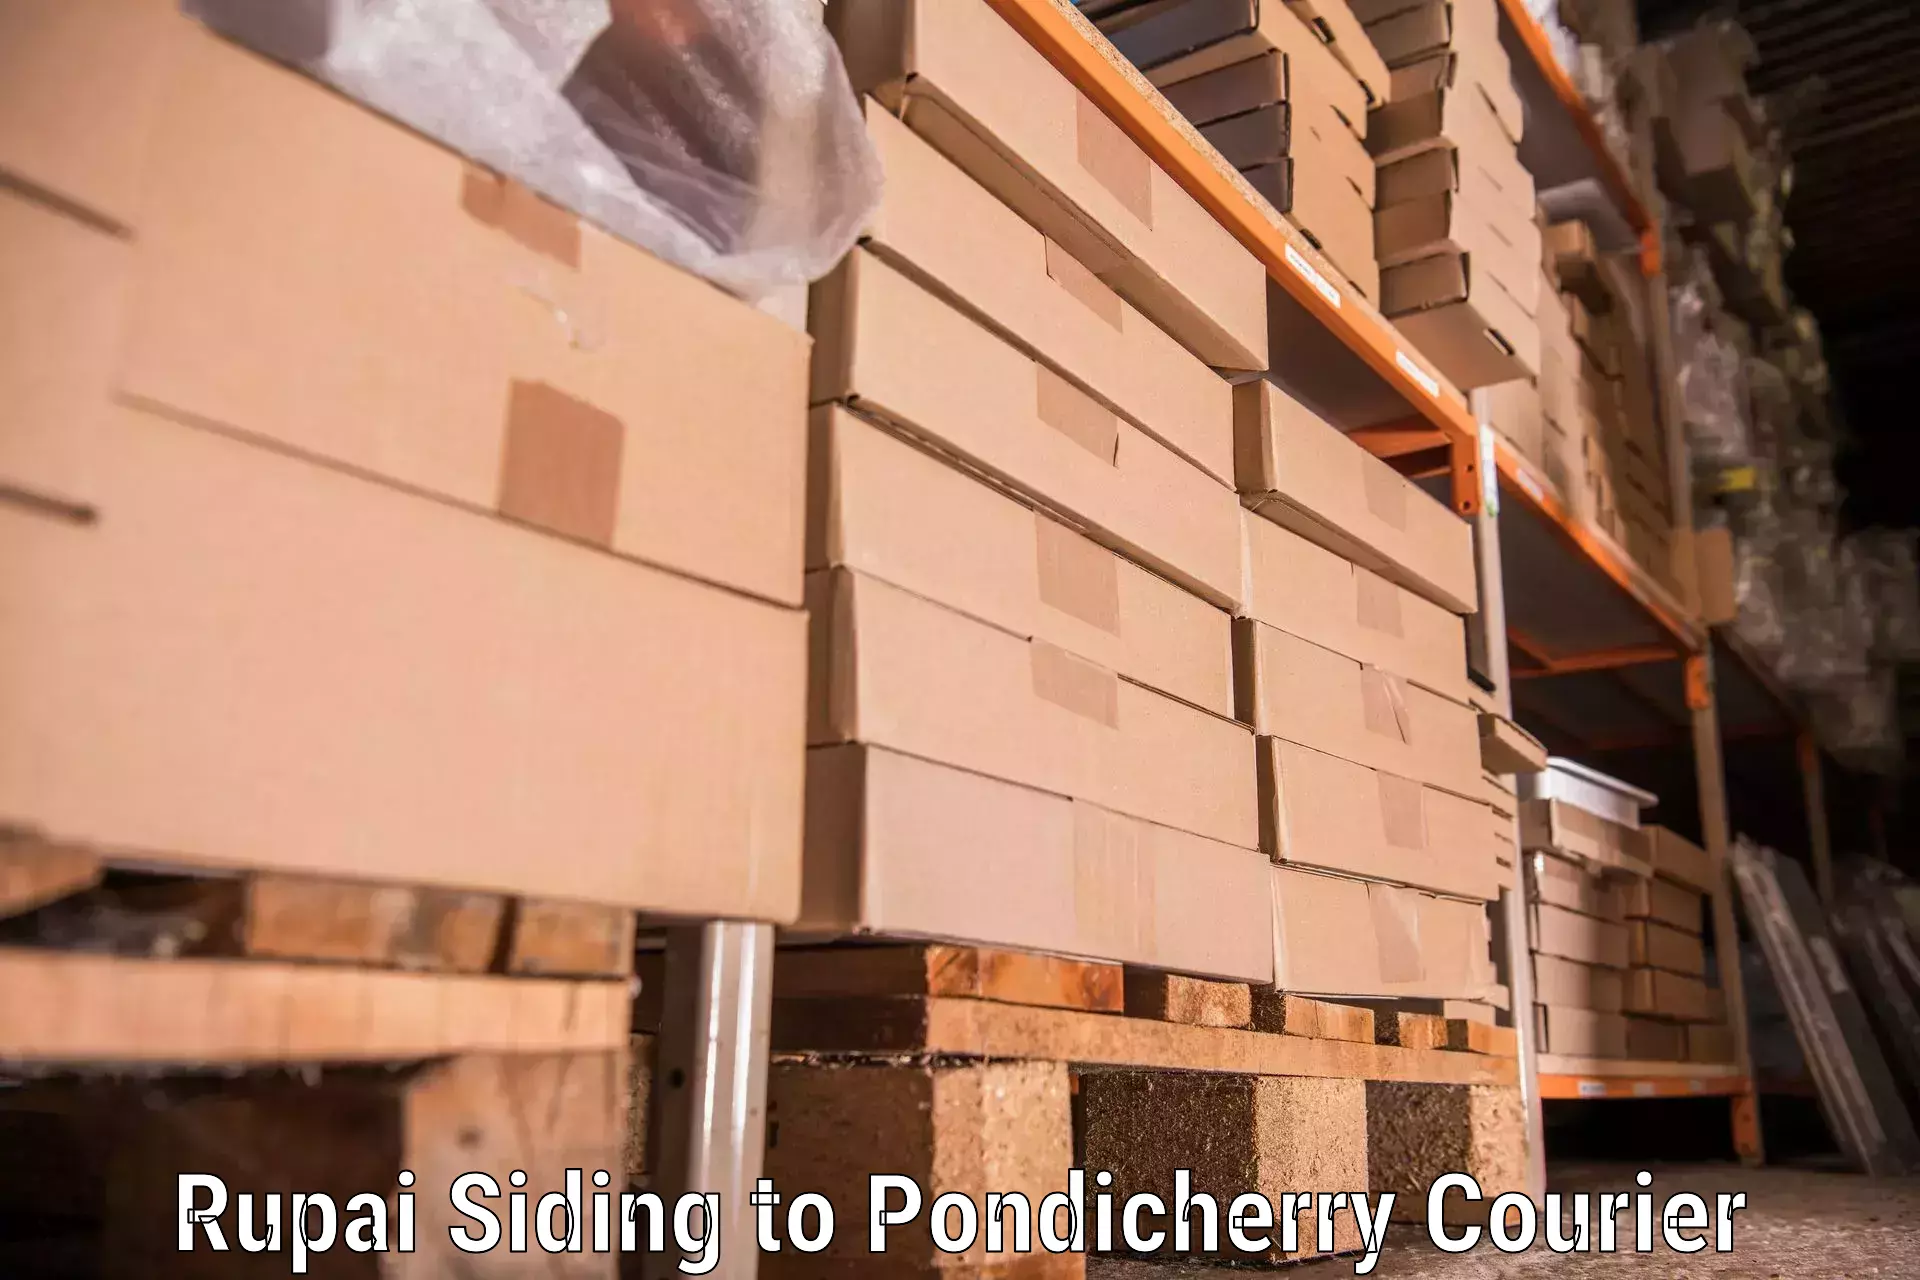 Specialized furniture movers Rupai Siding to Pondicherry